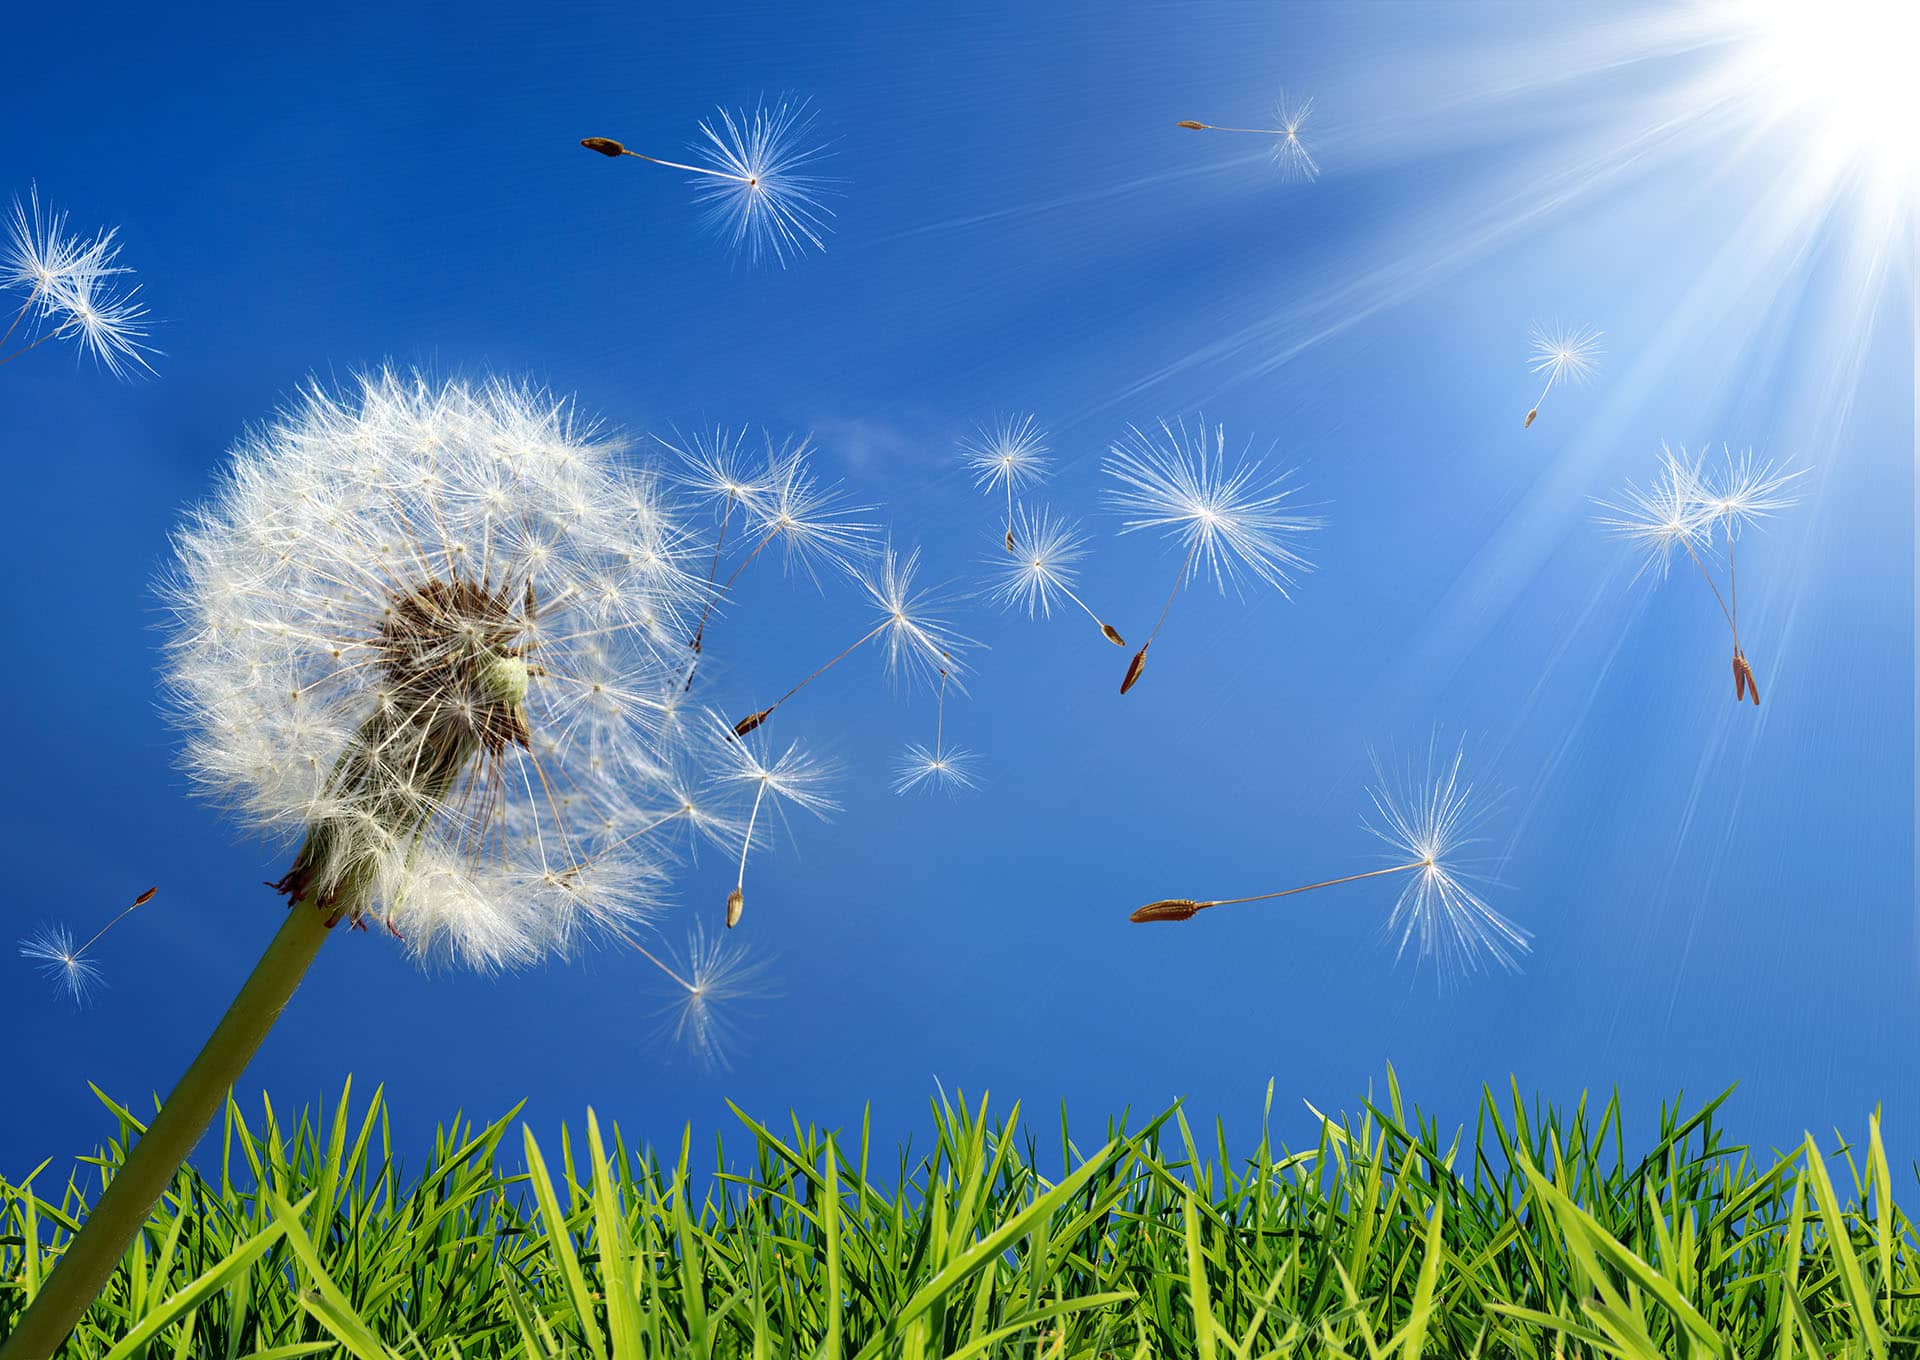 a dandelion blows in the wind, spreads allergies